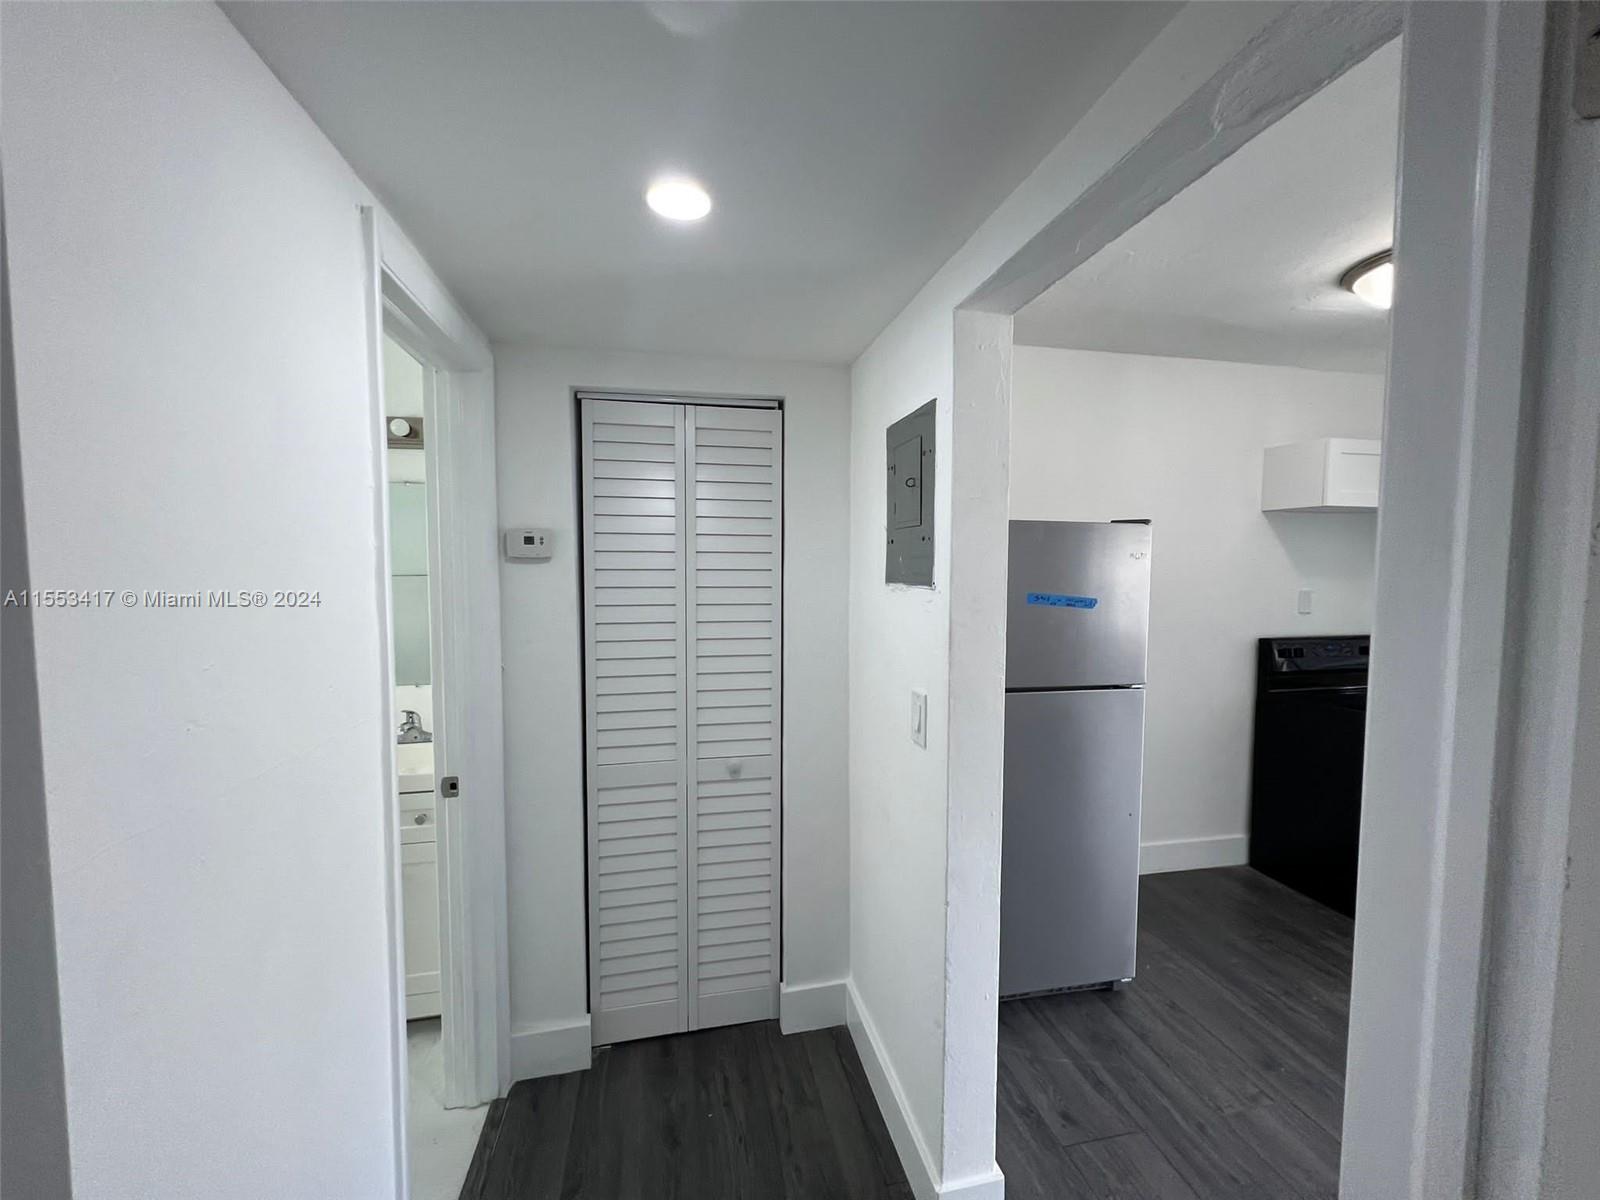 2150 NW 24th St 4, Miami, Florida 33142, 1 Bedroom Bedrooms, ,1 BathroomBathrooms,Residentiallease,For Rent,2150 NW 24th St 4,A11553417